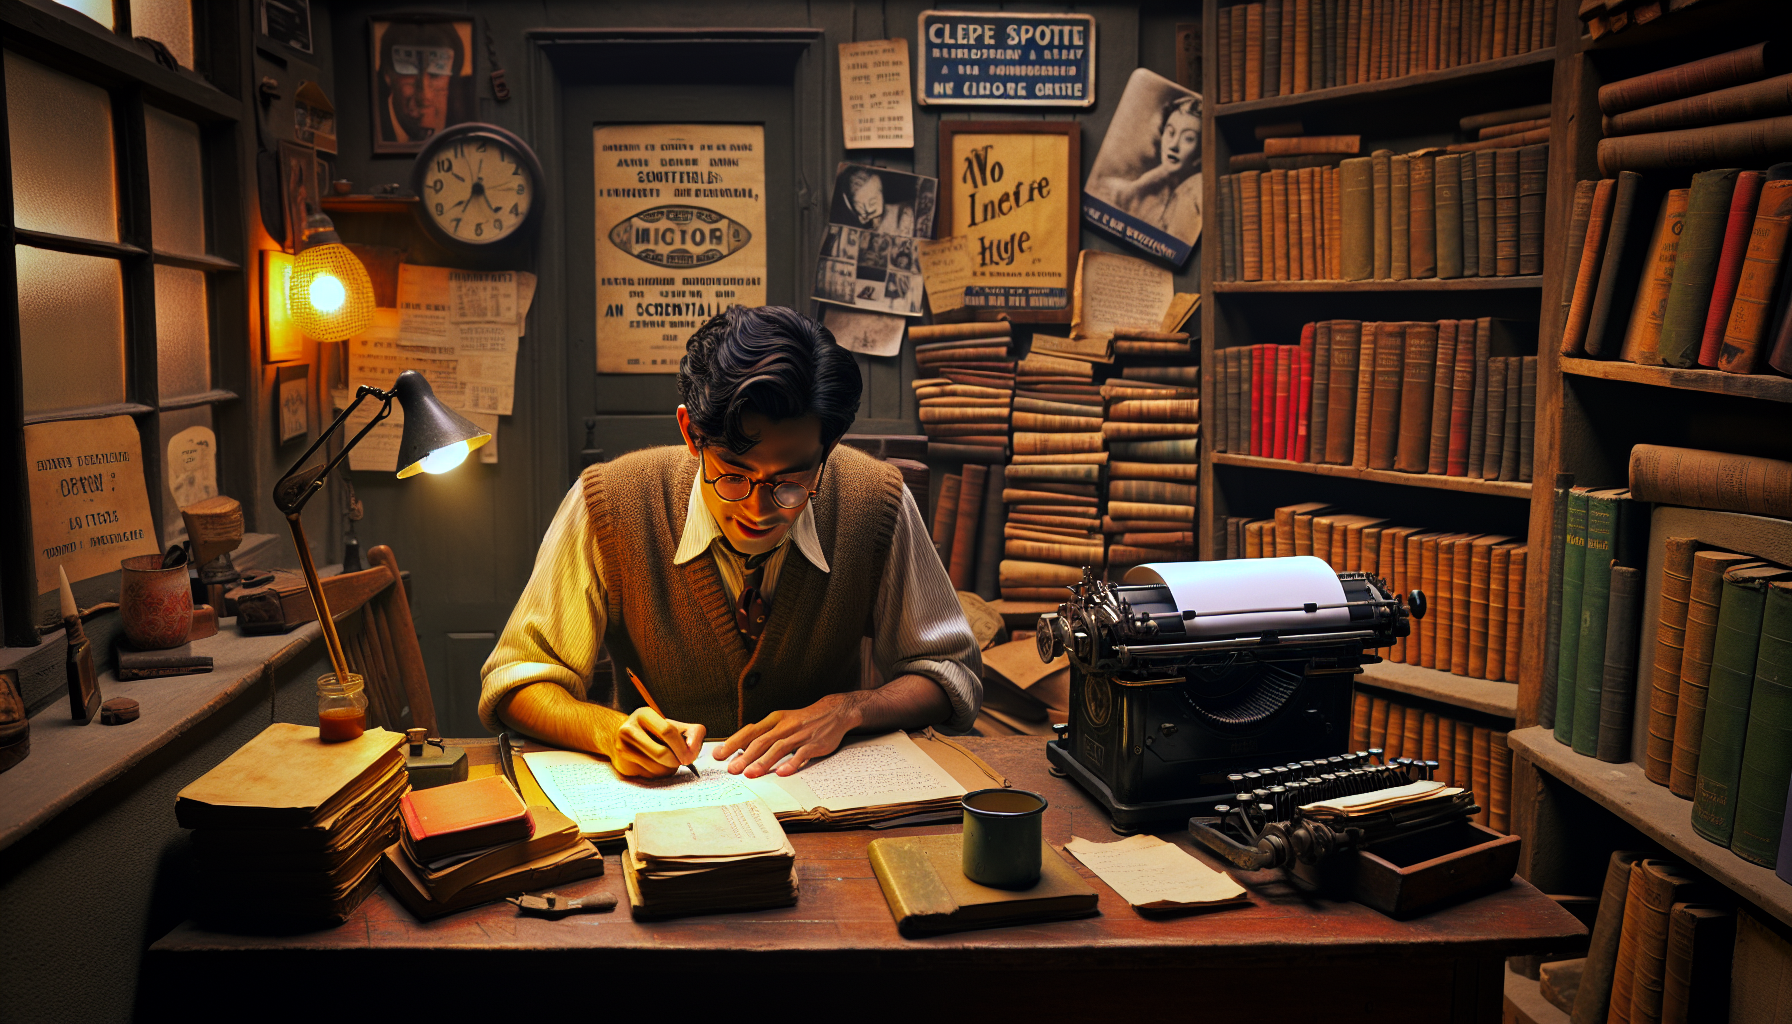 A cozy, dimly-lit writer's room with a person sitting at an antique wooden desk, surrounded by stacks of screenplay scripts and an old typewriter. The walls are lined with bookshelves filled with film